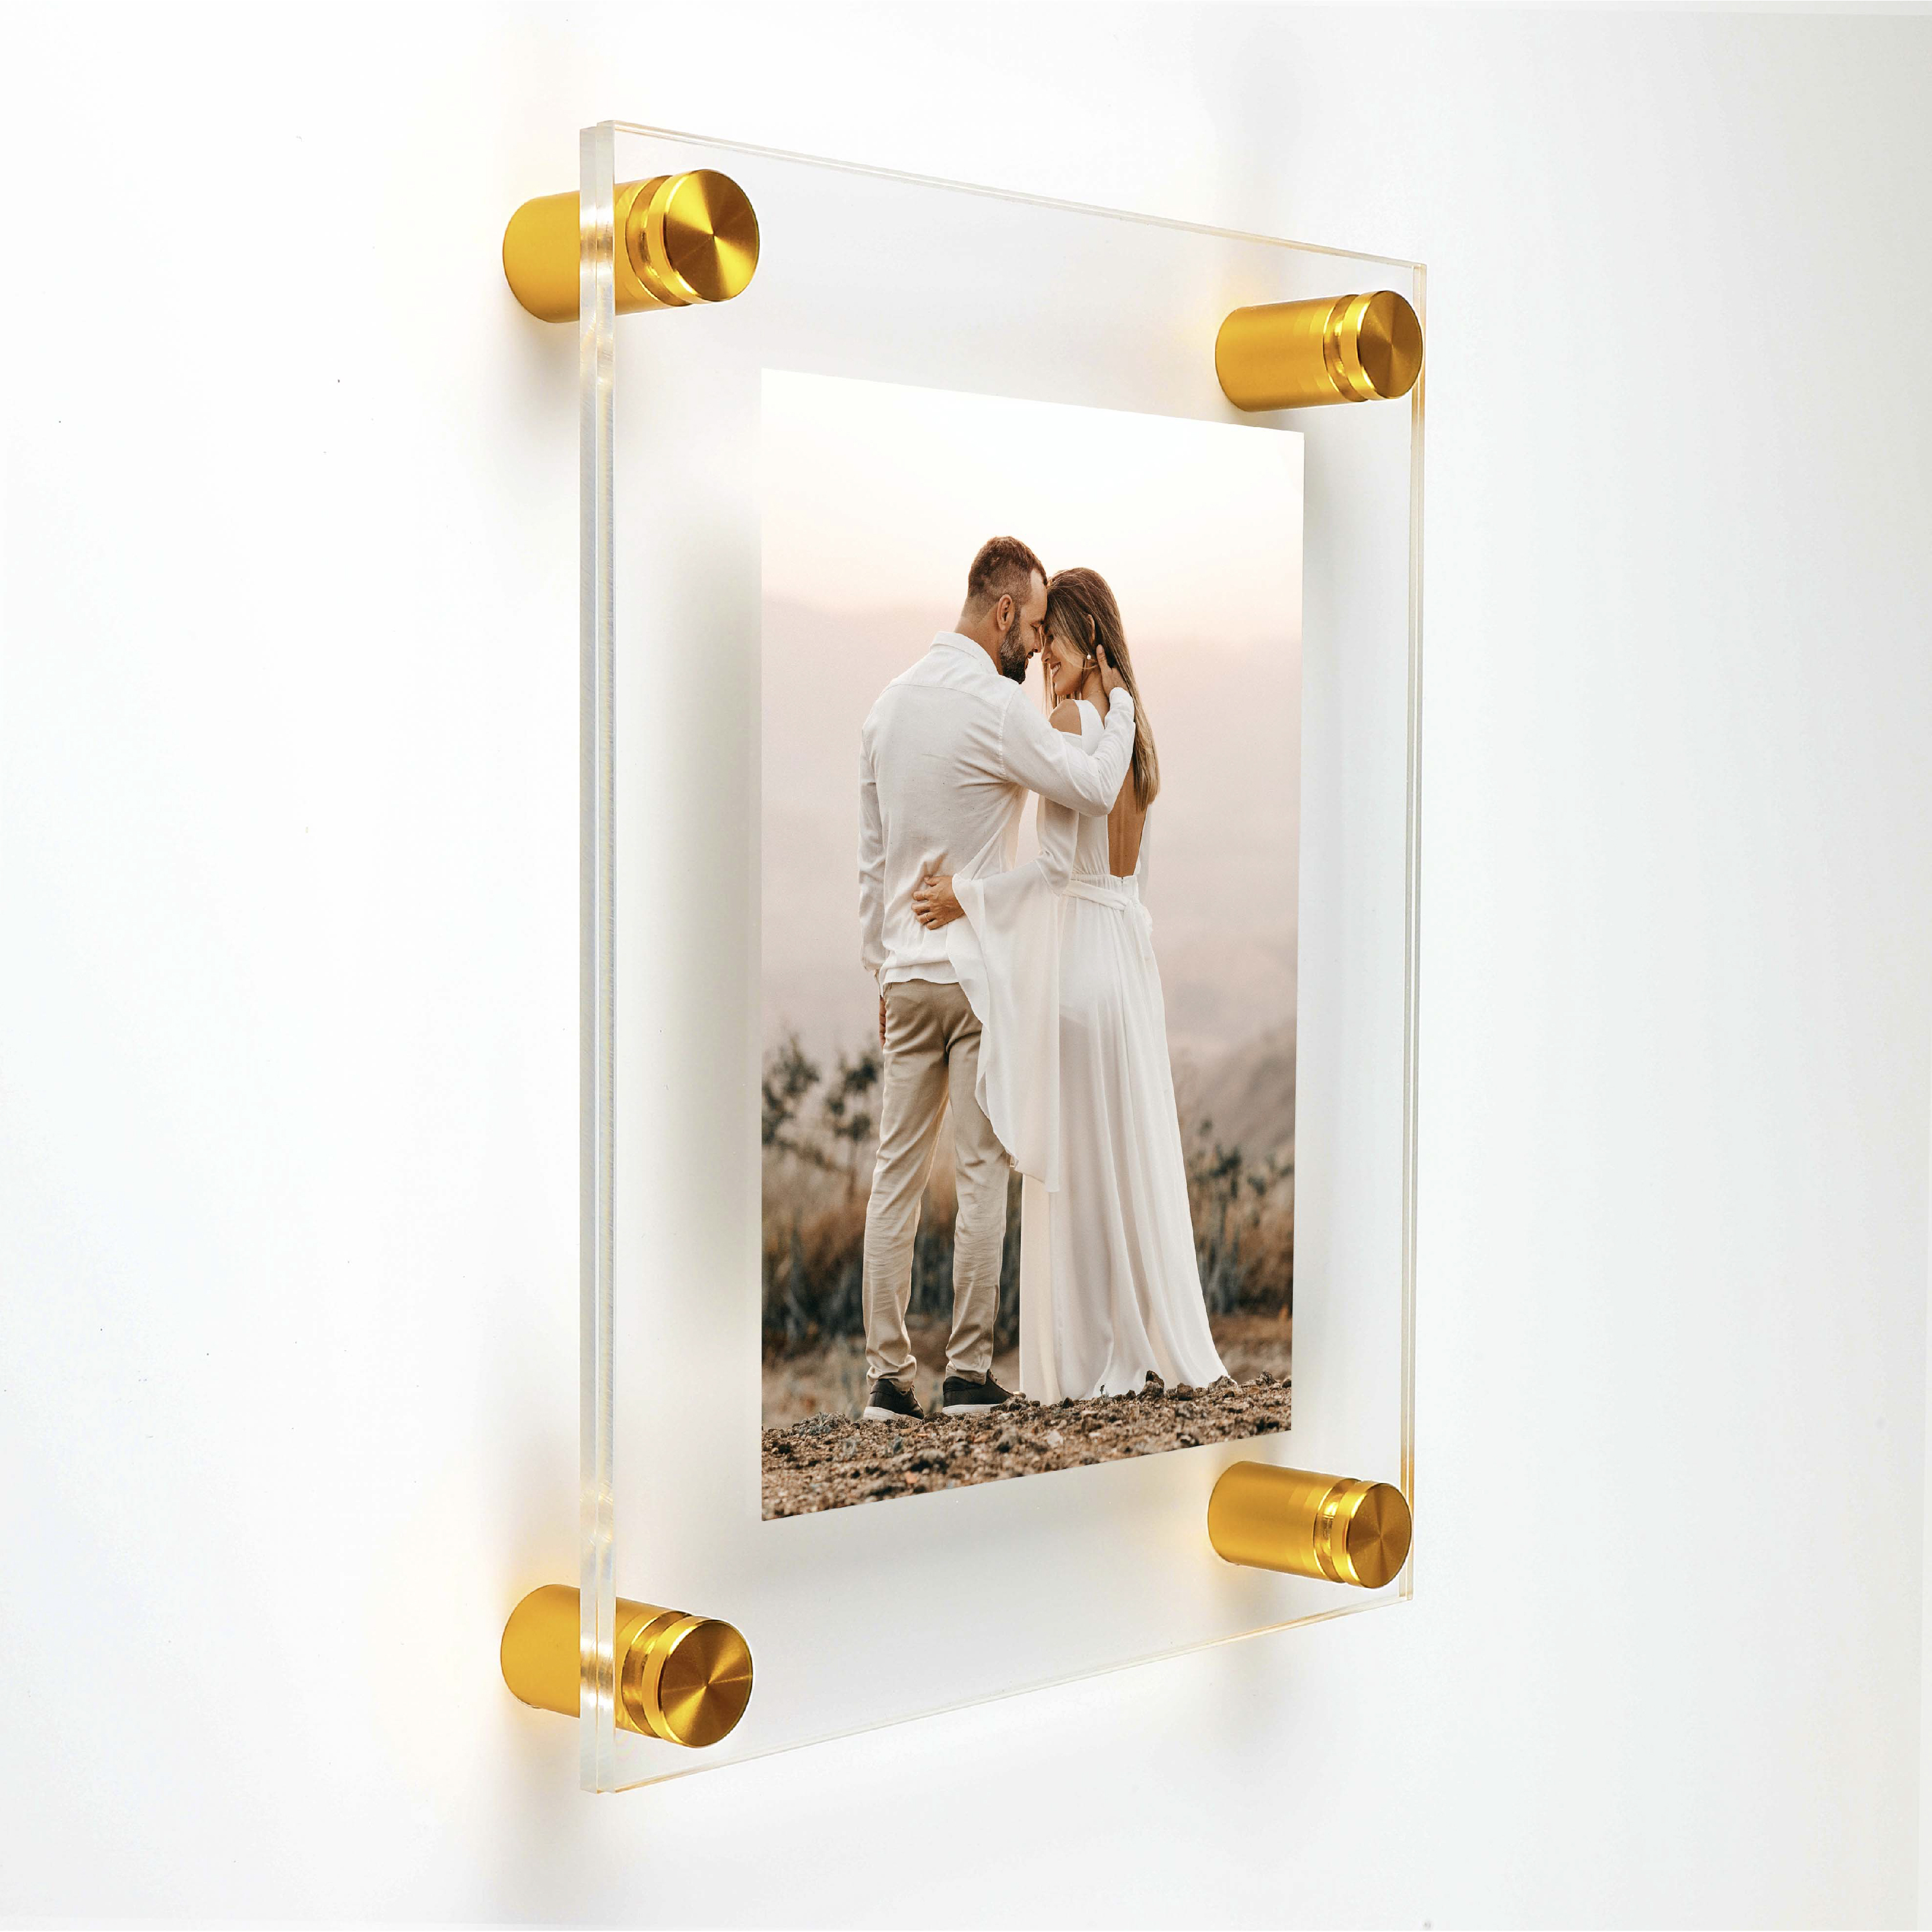 (2) 11'' x 13-1/2'' Clear Acrylics , Pre-Drilled With Polished Edges (Thick 1/8'' each), Wall Frame with (4) 3/4'' x 1'' Gold Anodized Aluminum Standoffs includes Screws and Anchors